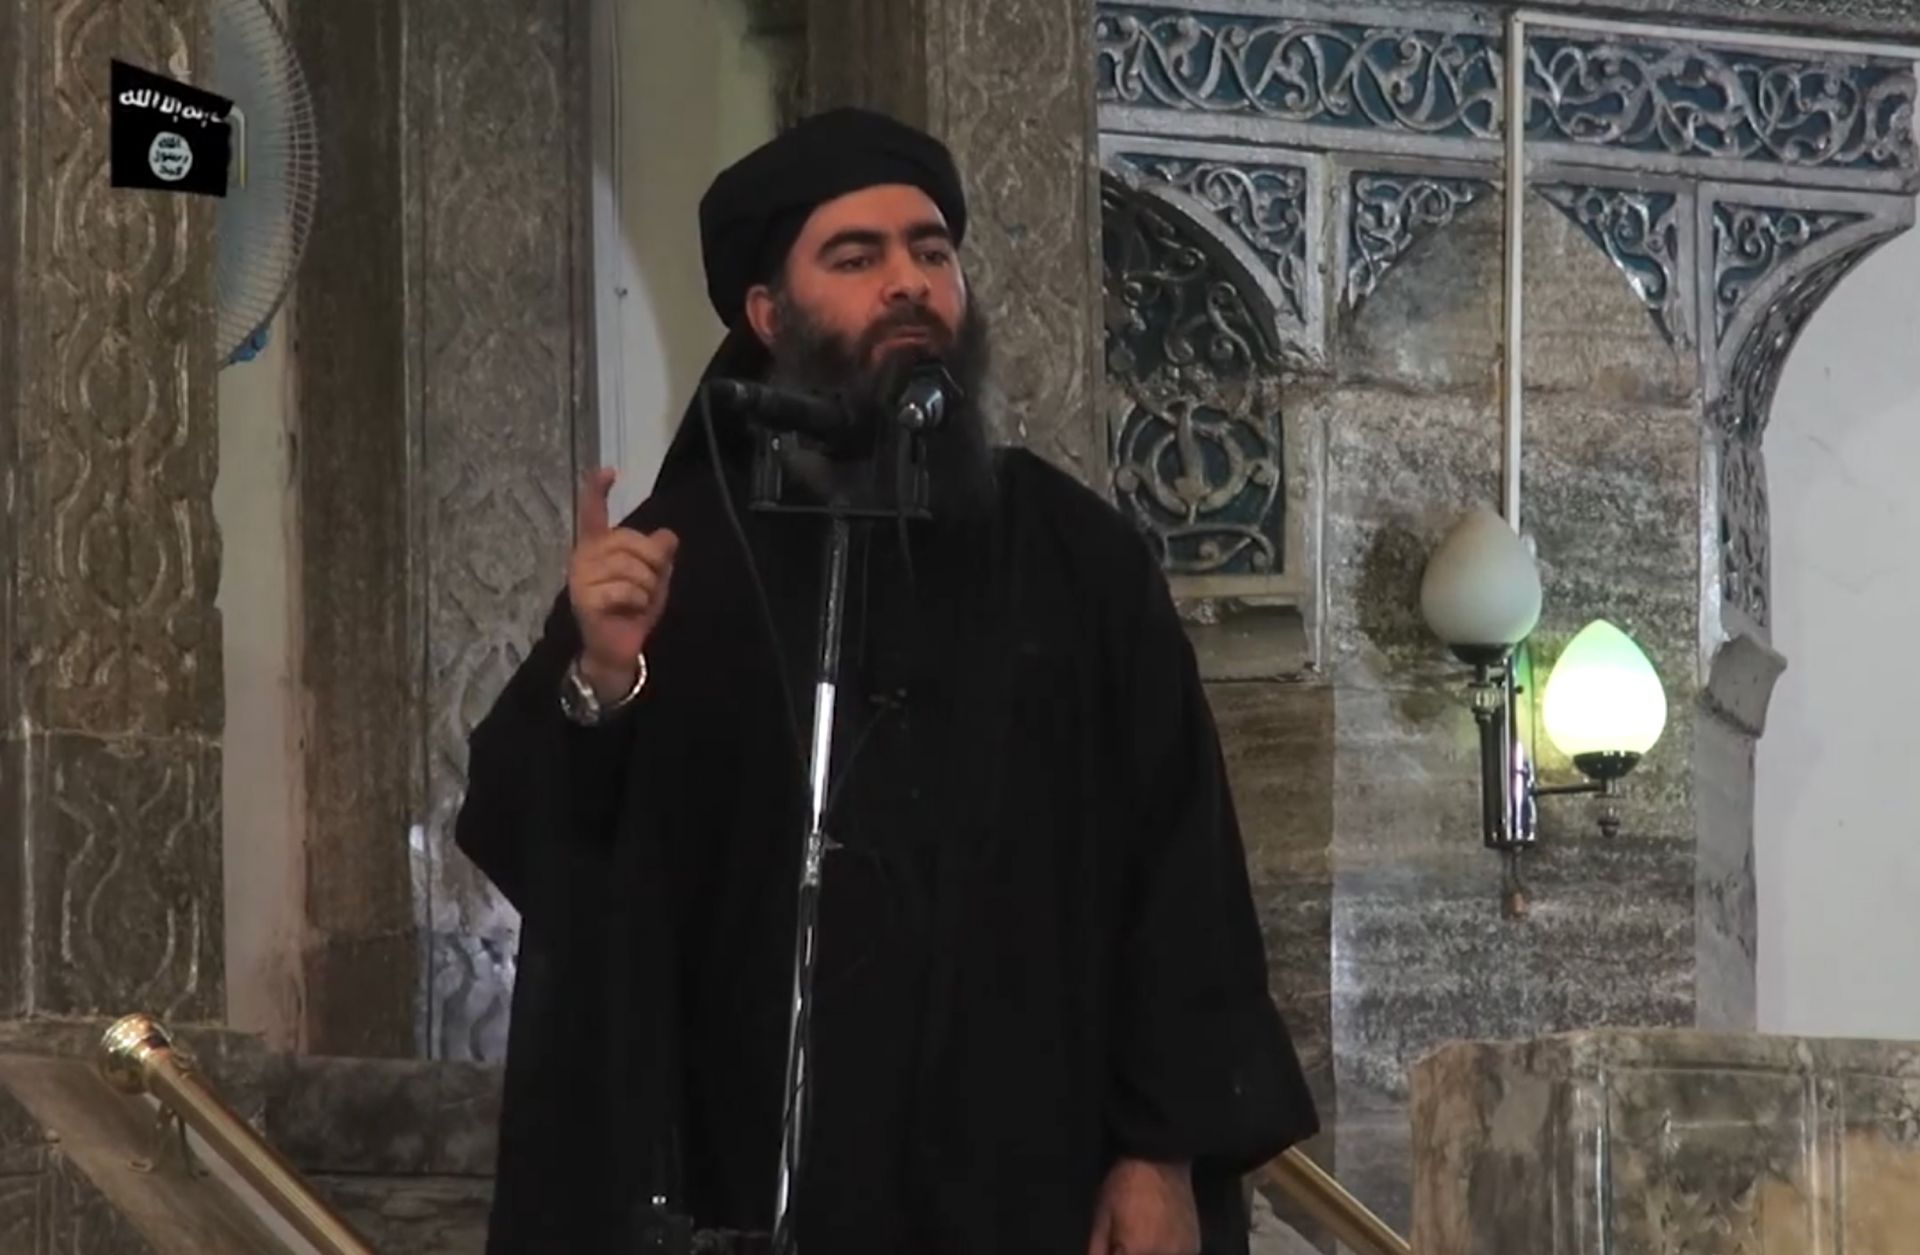 This July 5, 2014, photo shows an image grab taken from a propaganda video released by al-Furqan Media showing Islamic State leader Abu Bakr al-Baghdadi as he declares himself caliph in Mosul.